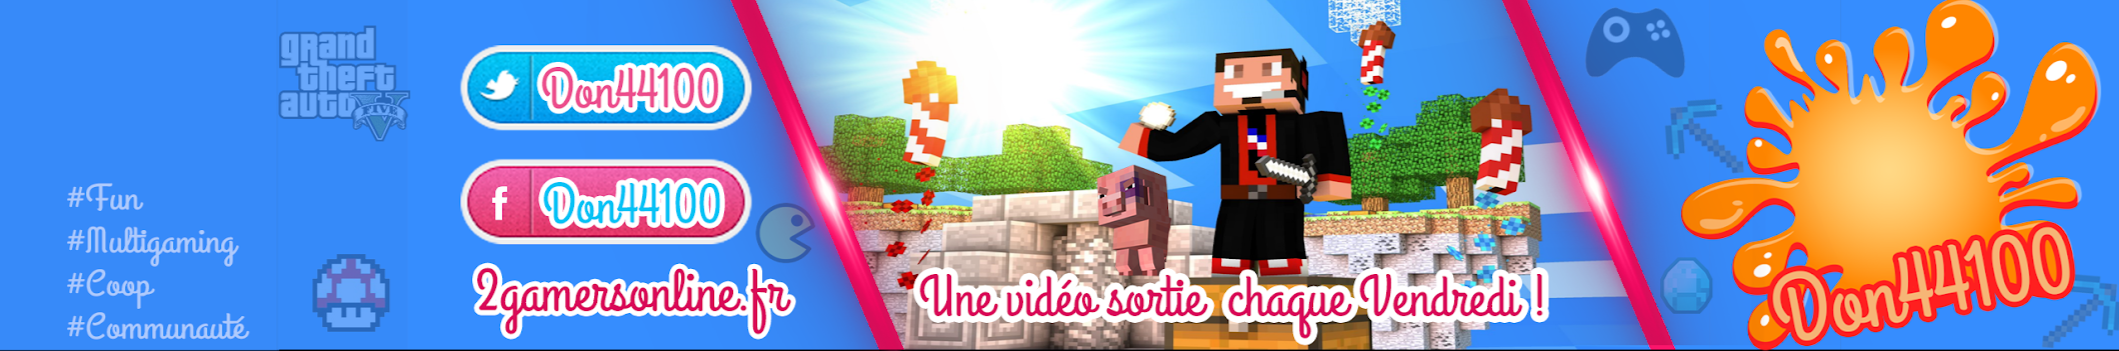 youtube-banner1.png